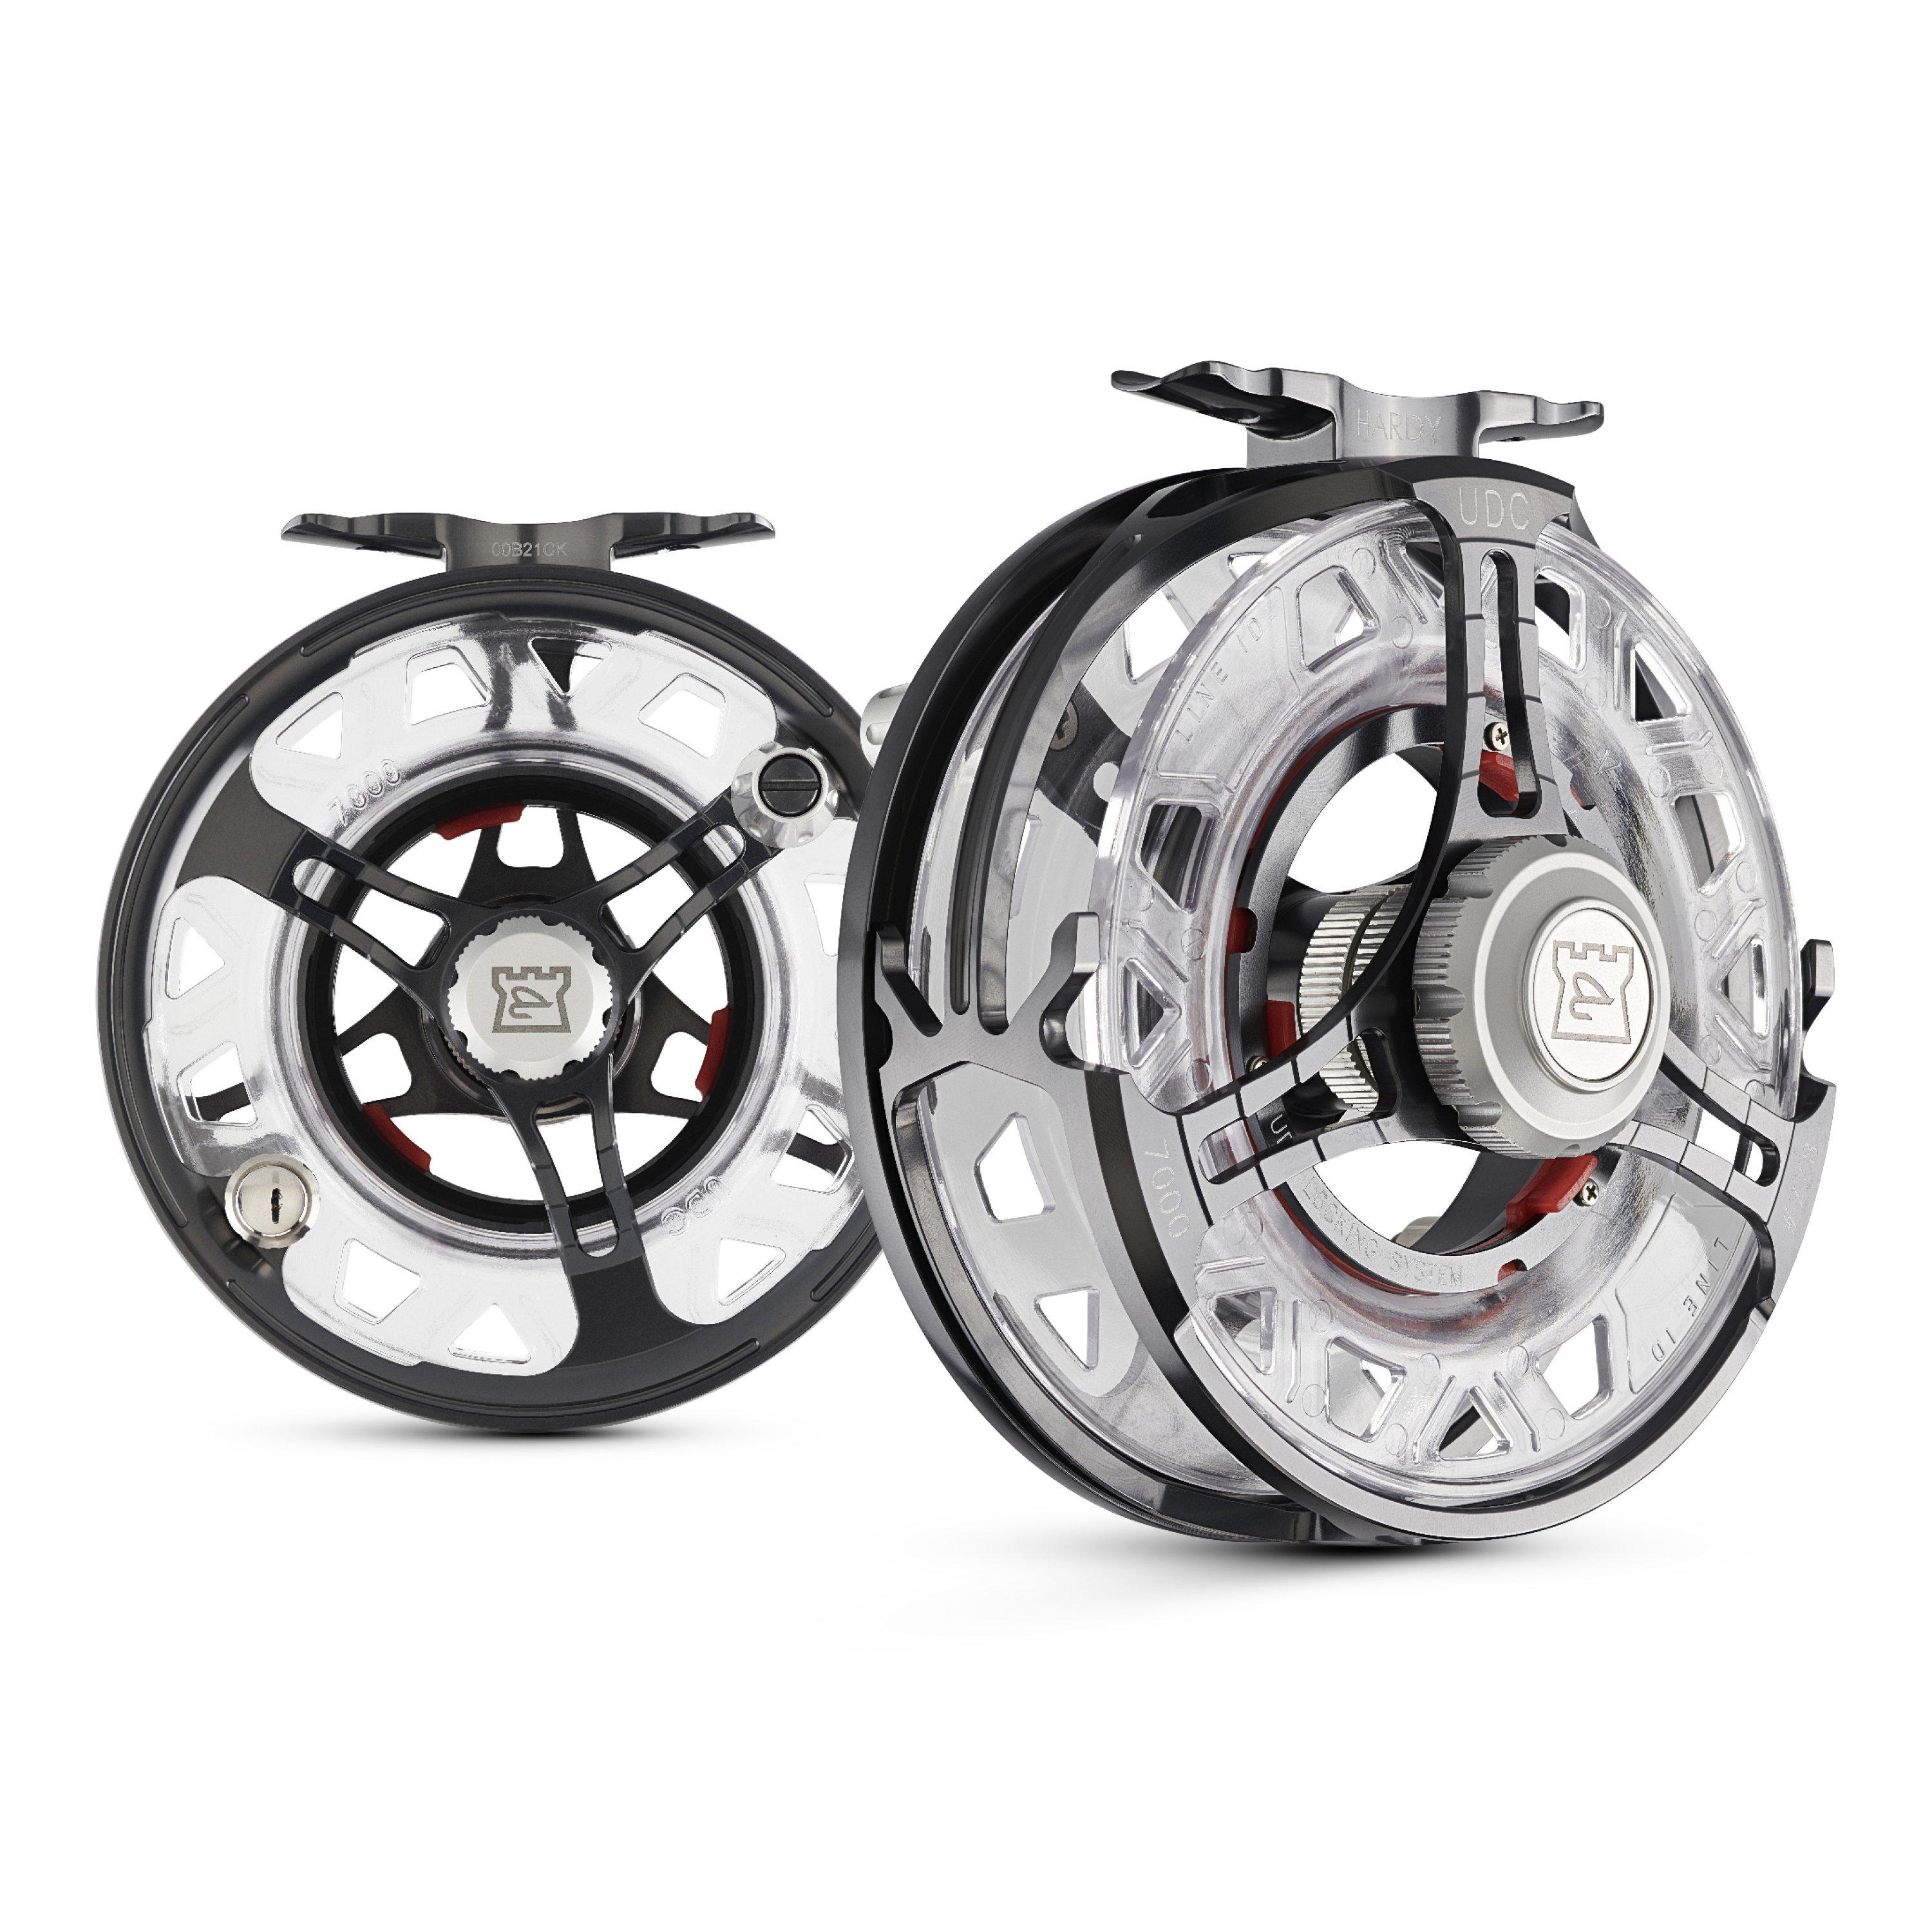 Hardy Ultraclick UCL 4000 Fly Reel